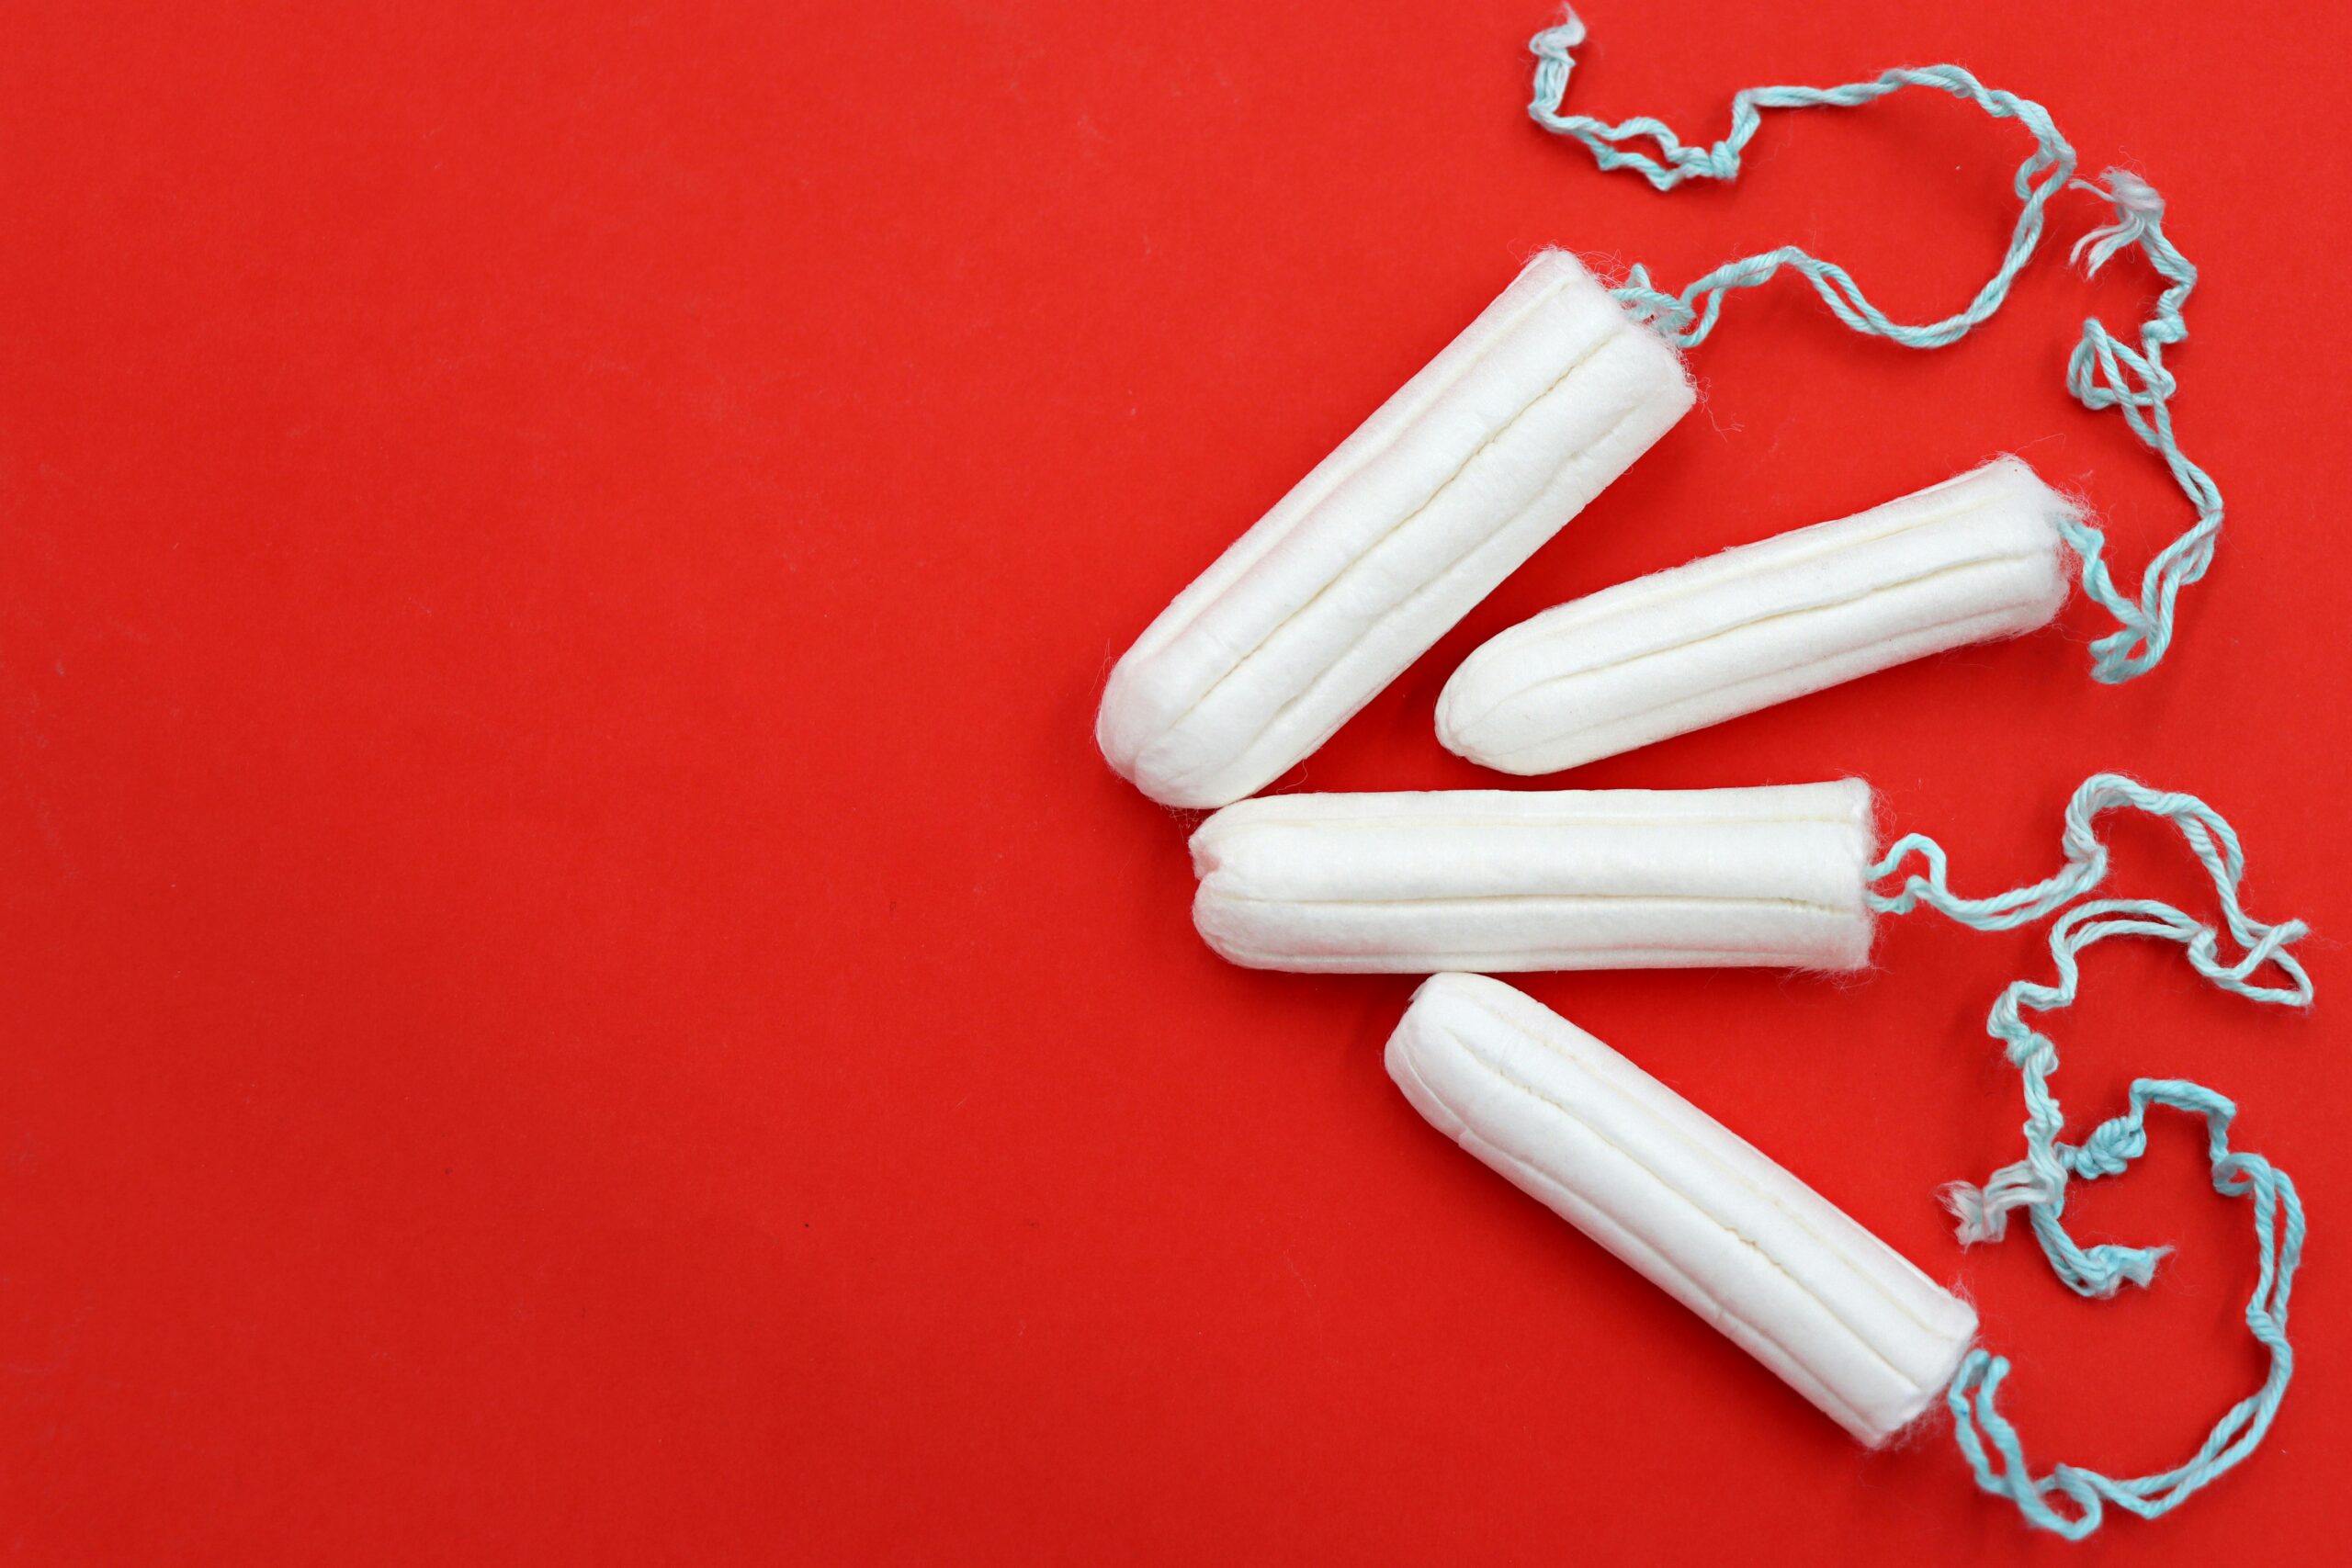 Should You Keep Your Tampon in While You Shower?